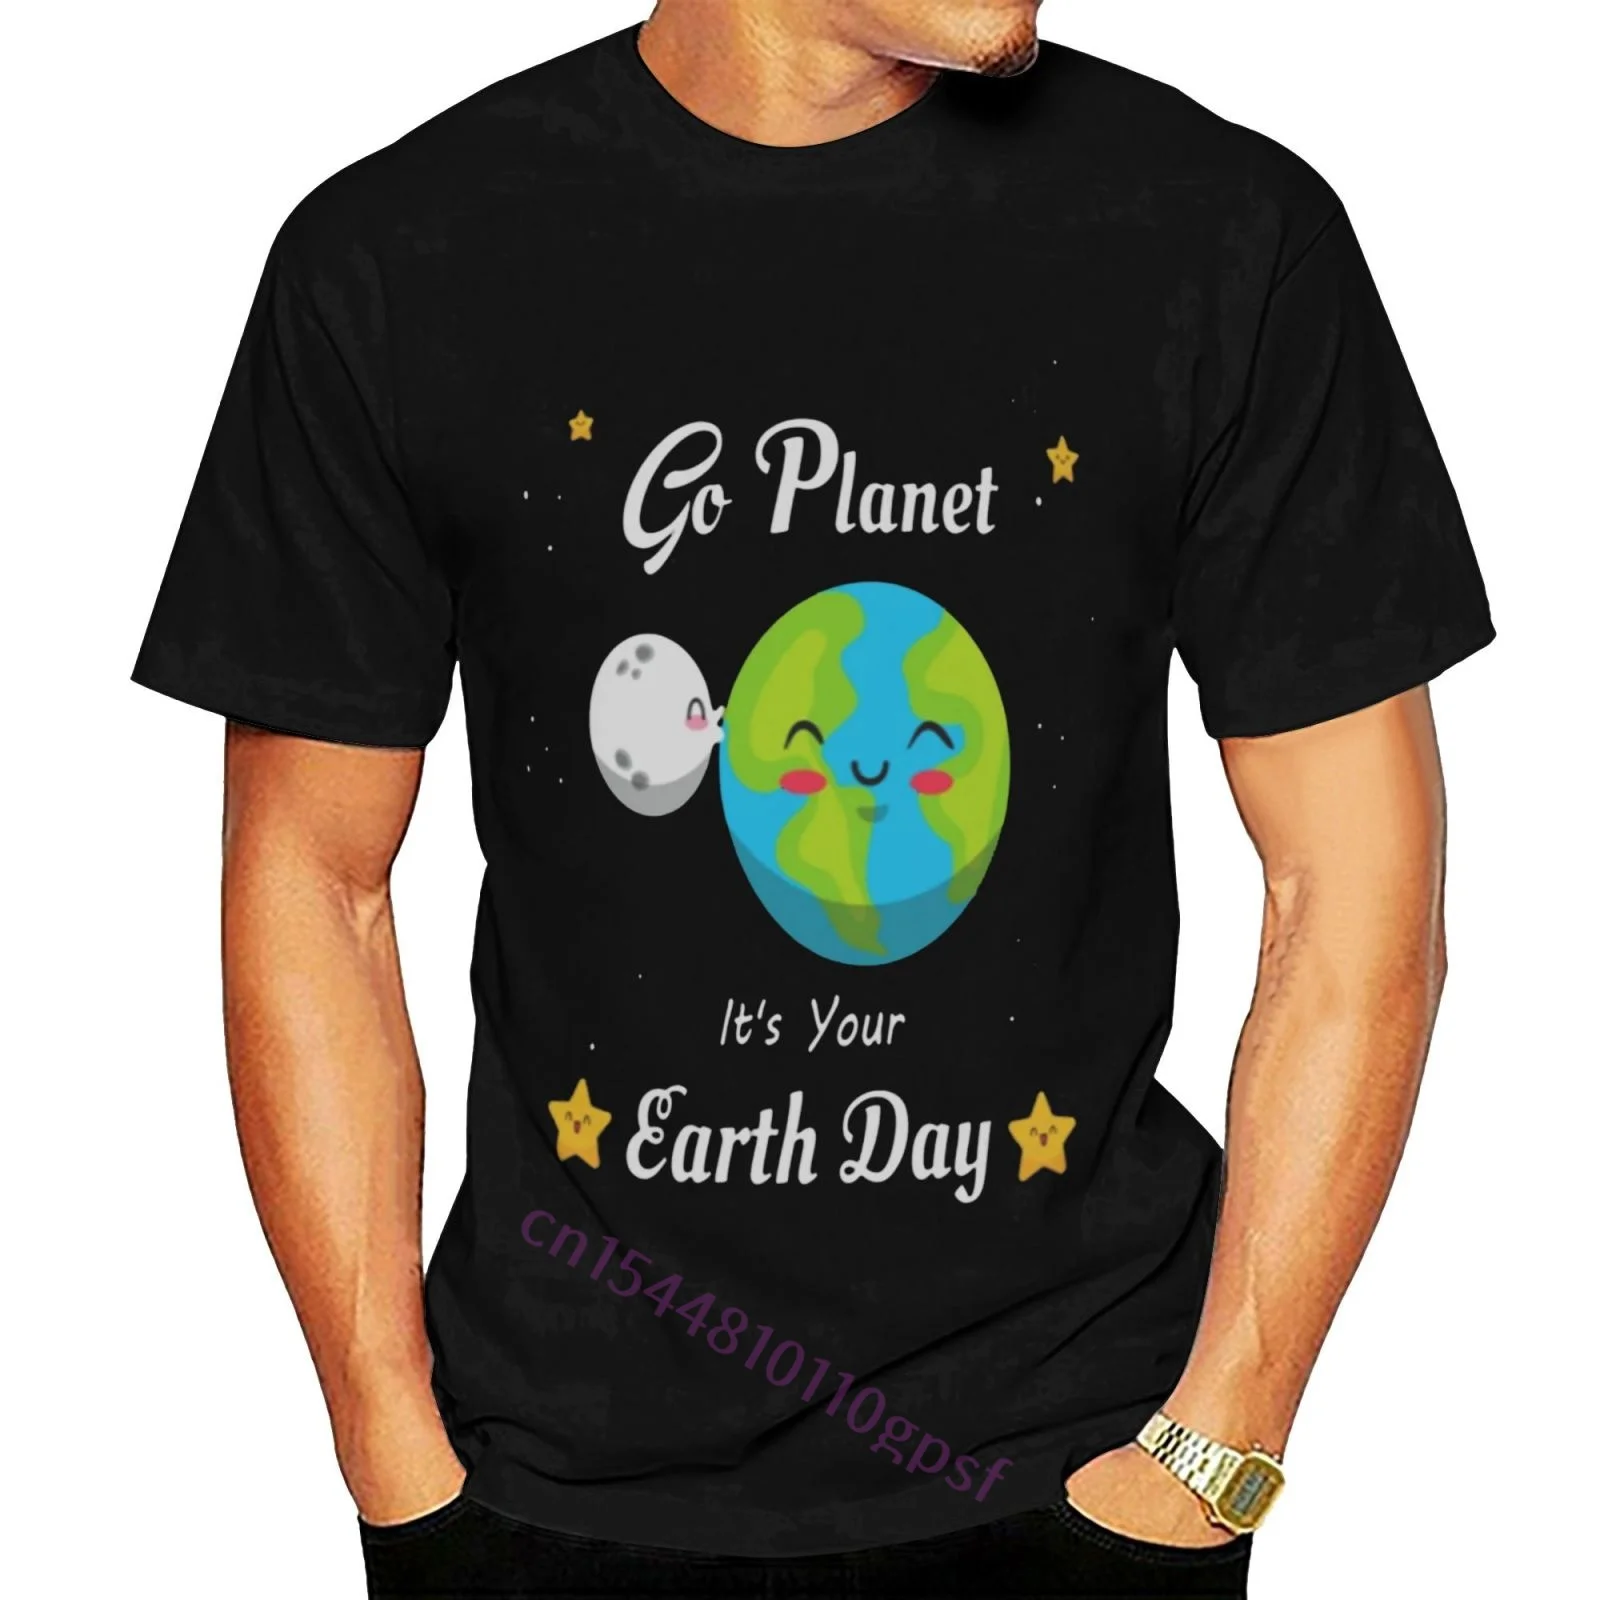 

Go Planet- It's Your Earth Day T Shirt Men Cotton Casual T-Shirts Crew Neck Tee Shirt Short Sleeve Tops Party